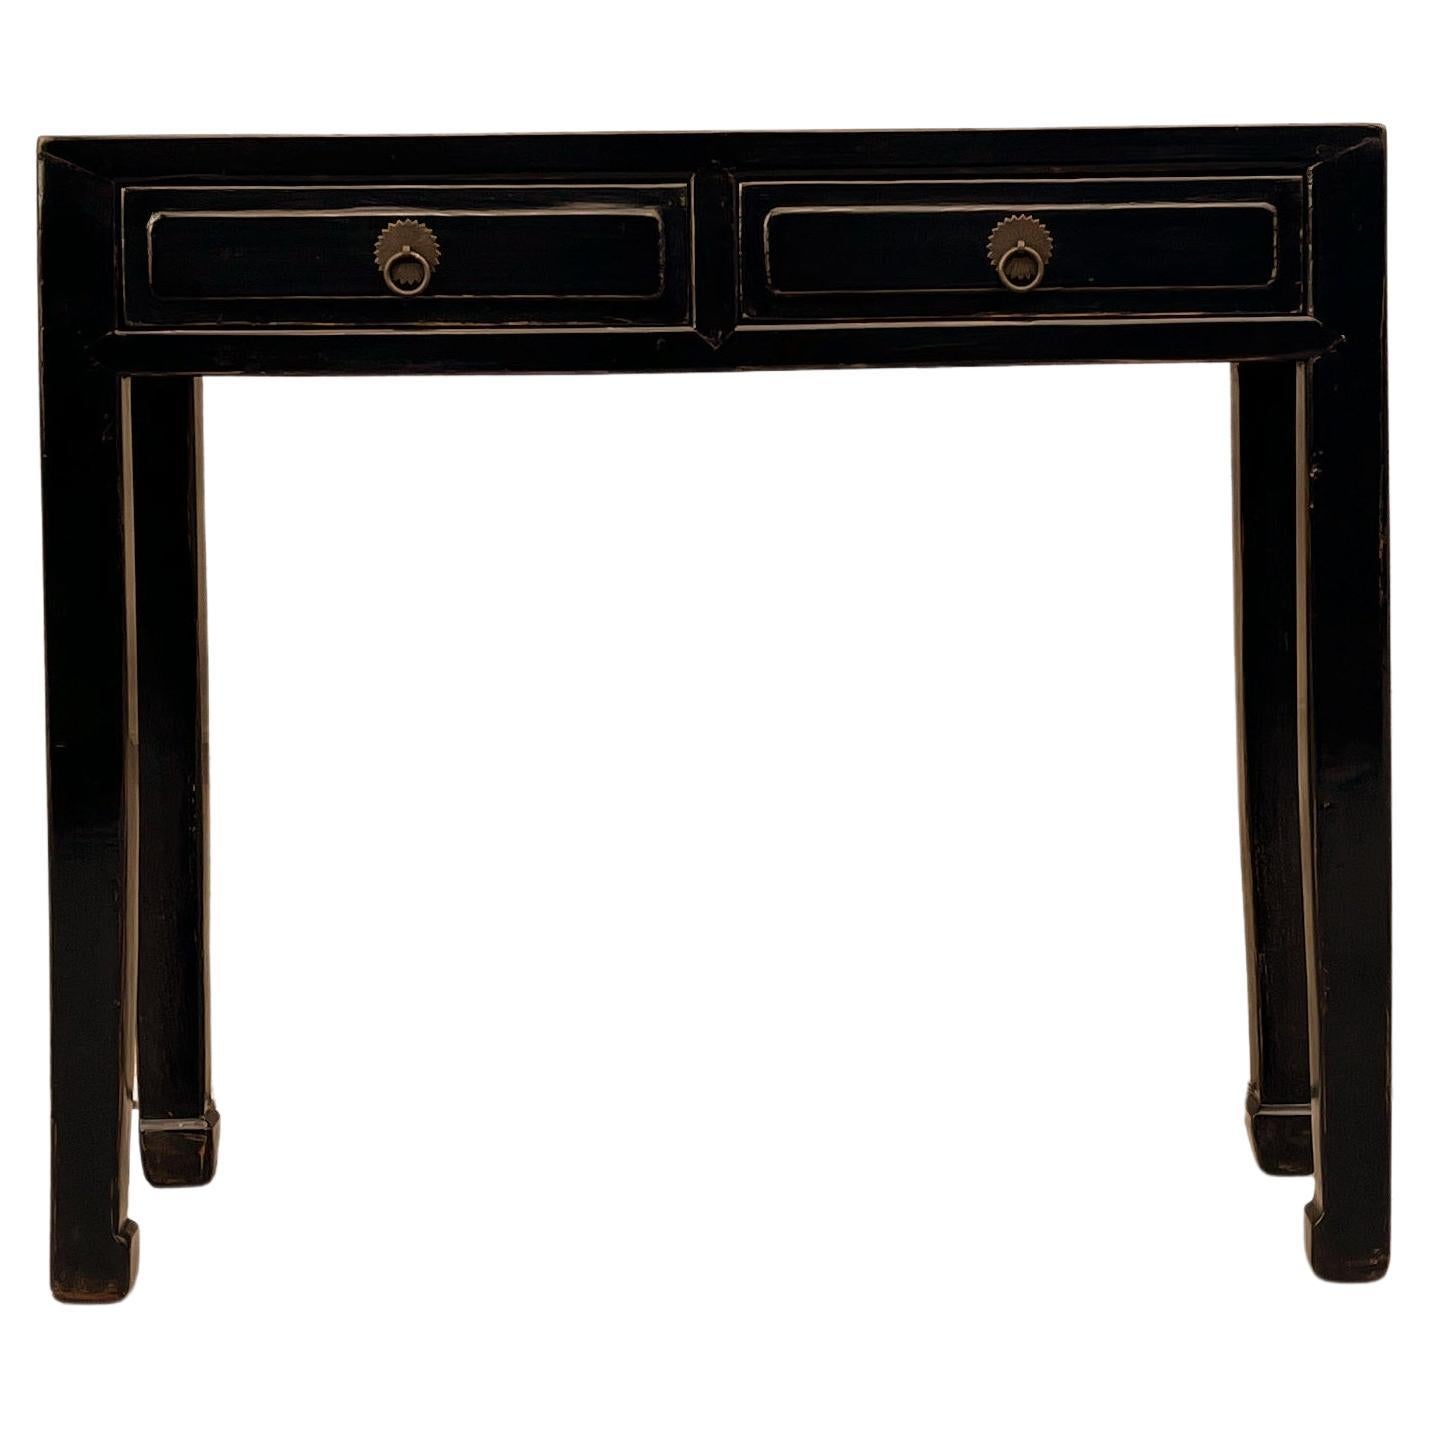 Black Lacquer Console Table with Drawers